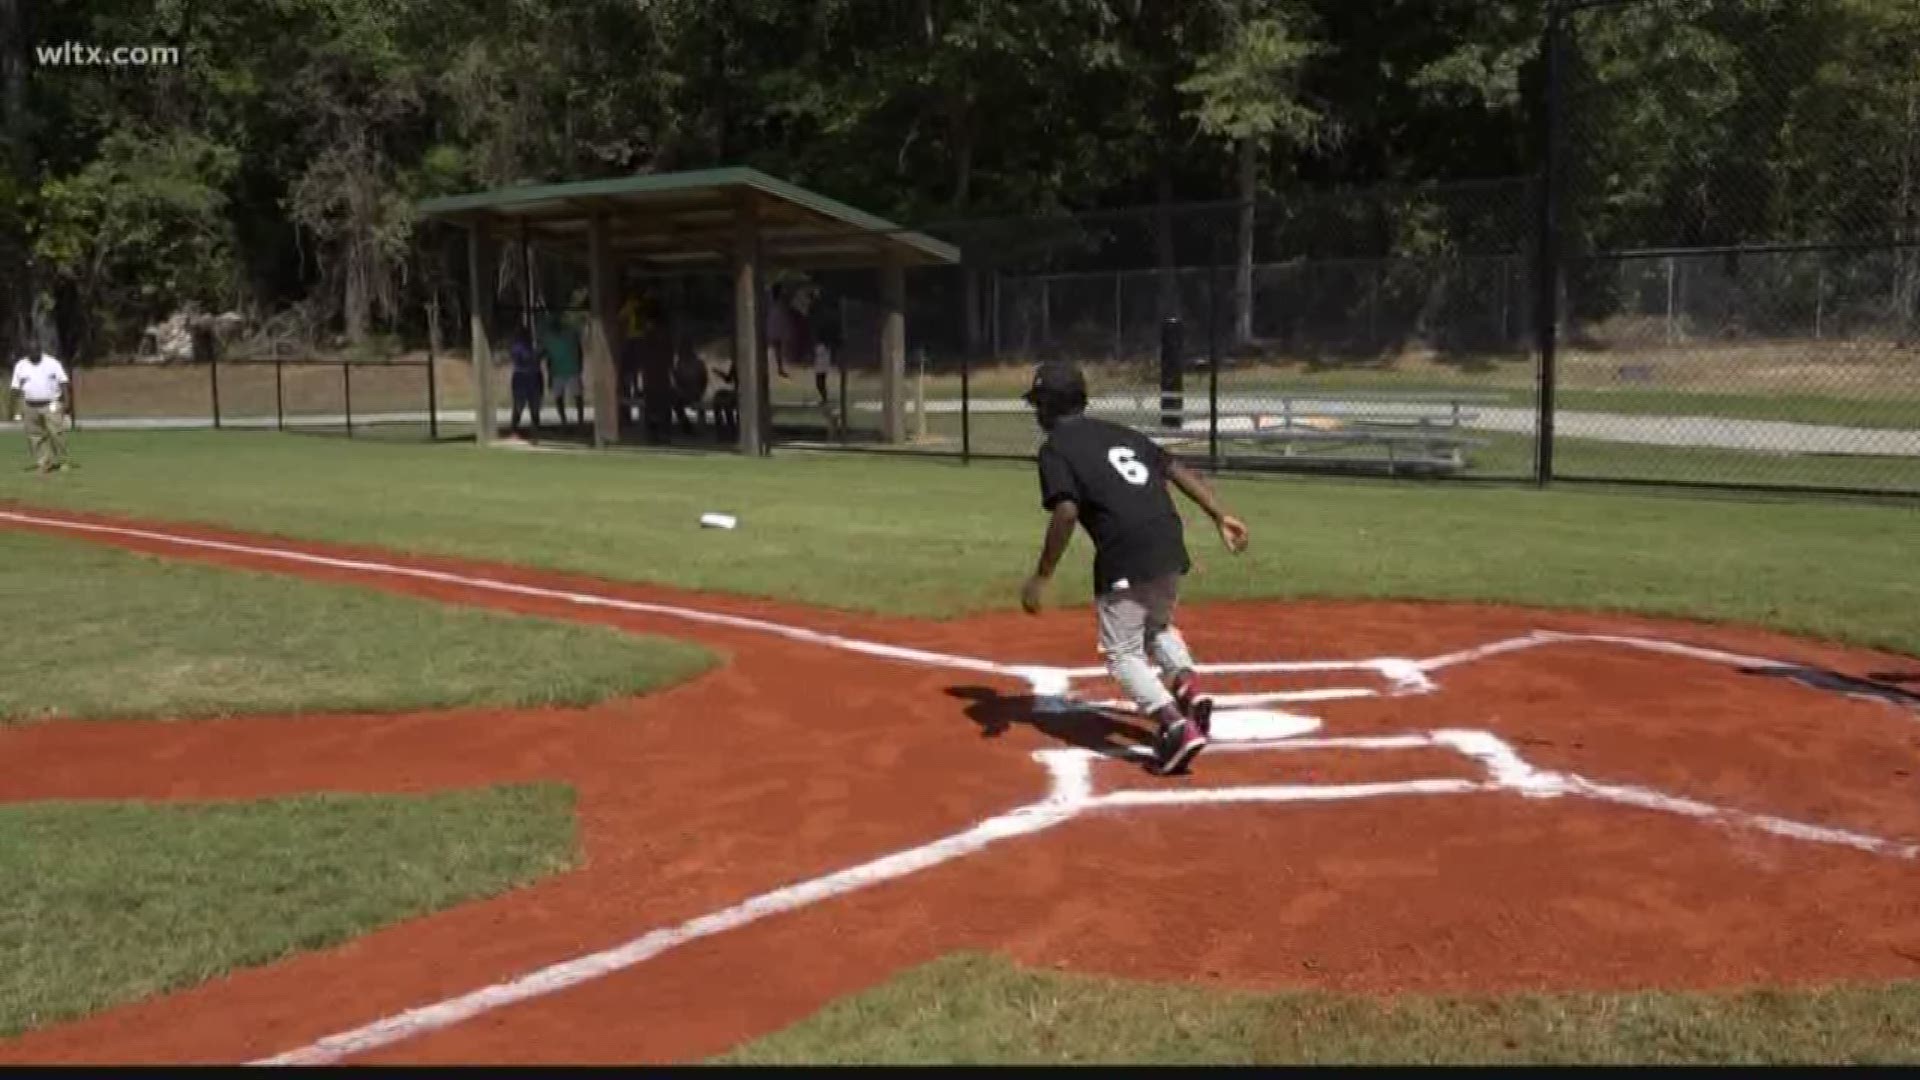 Kids in Columbia had their first chance to run across home plate at Columbia's new All Stars Baseball Field on Saturday. The City of Columbia hosted a grand opening for the park, which, just a few years ago, was mostly an empty field.